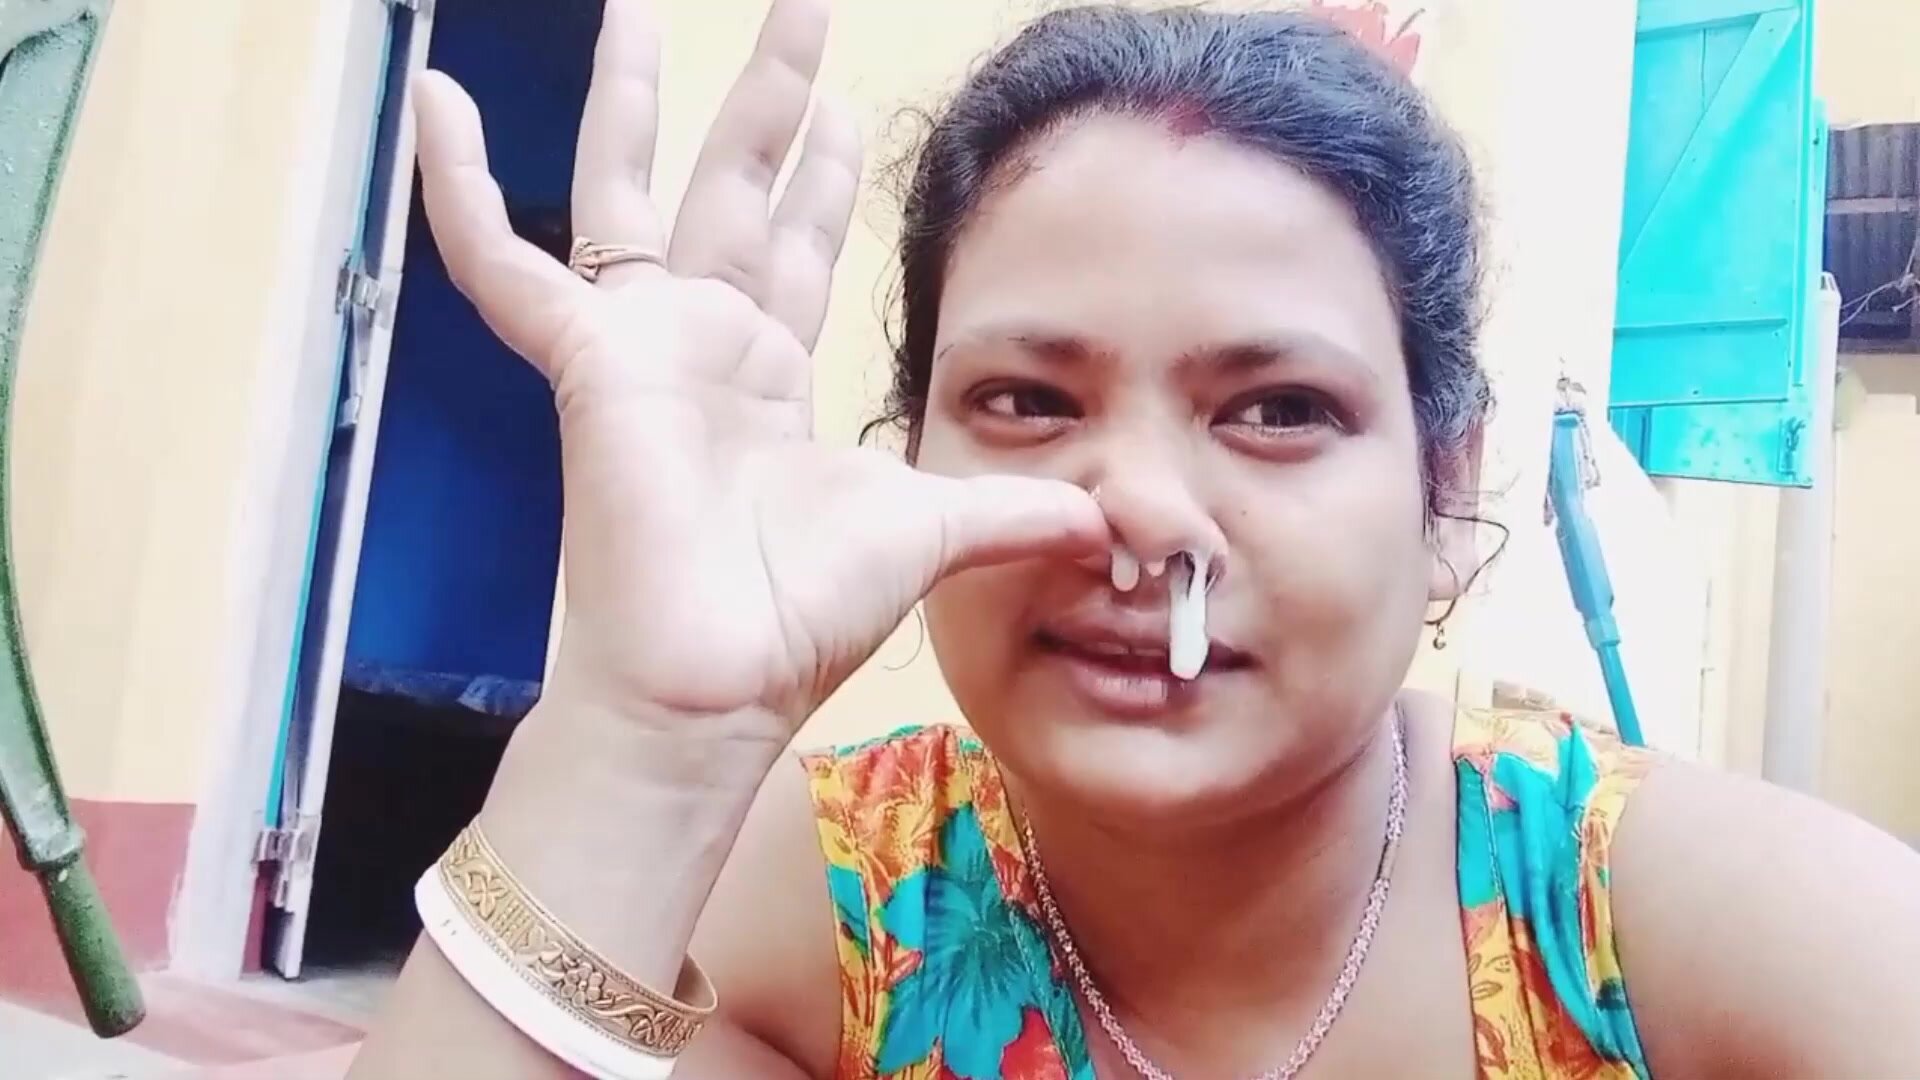 Super thick Indian Lady Snot